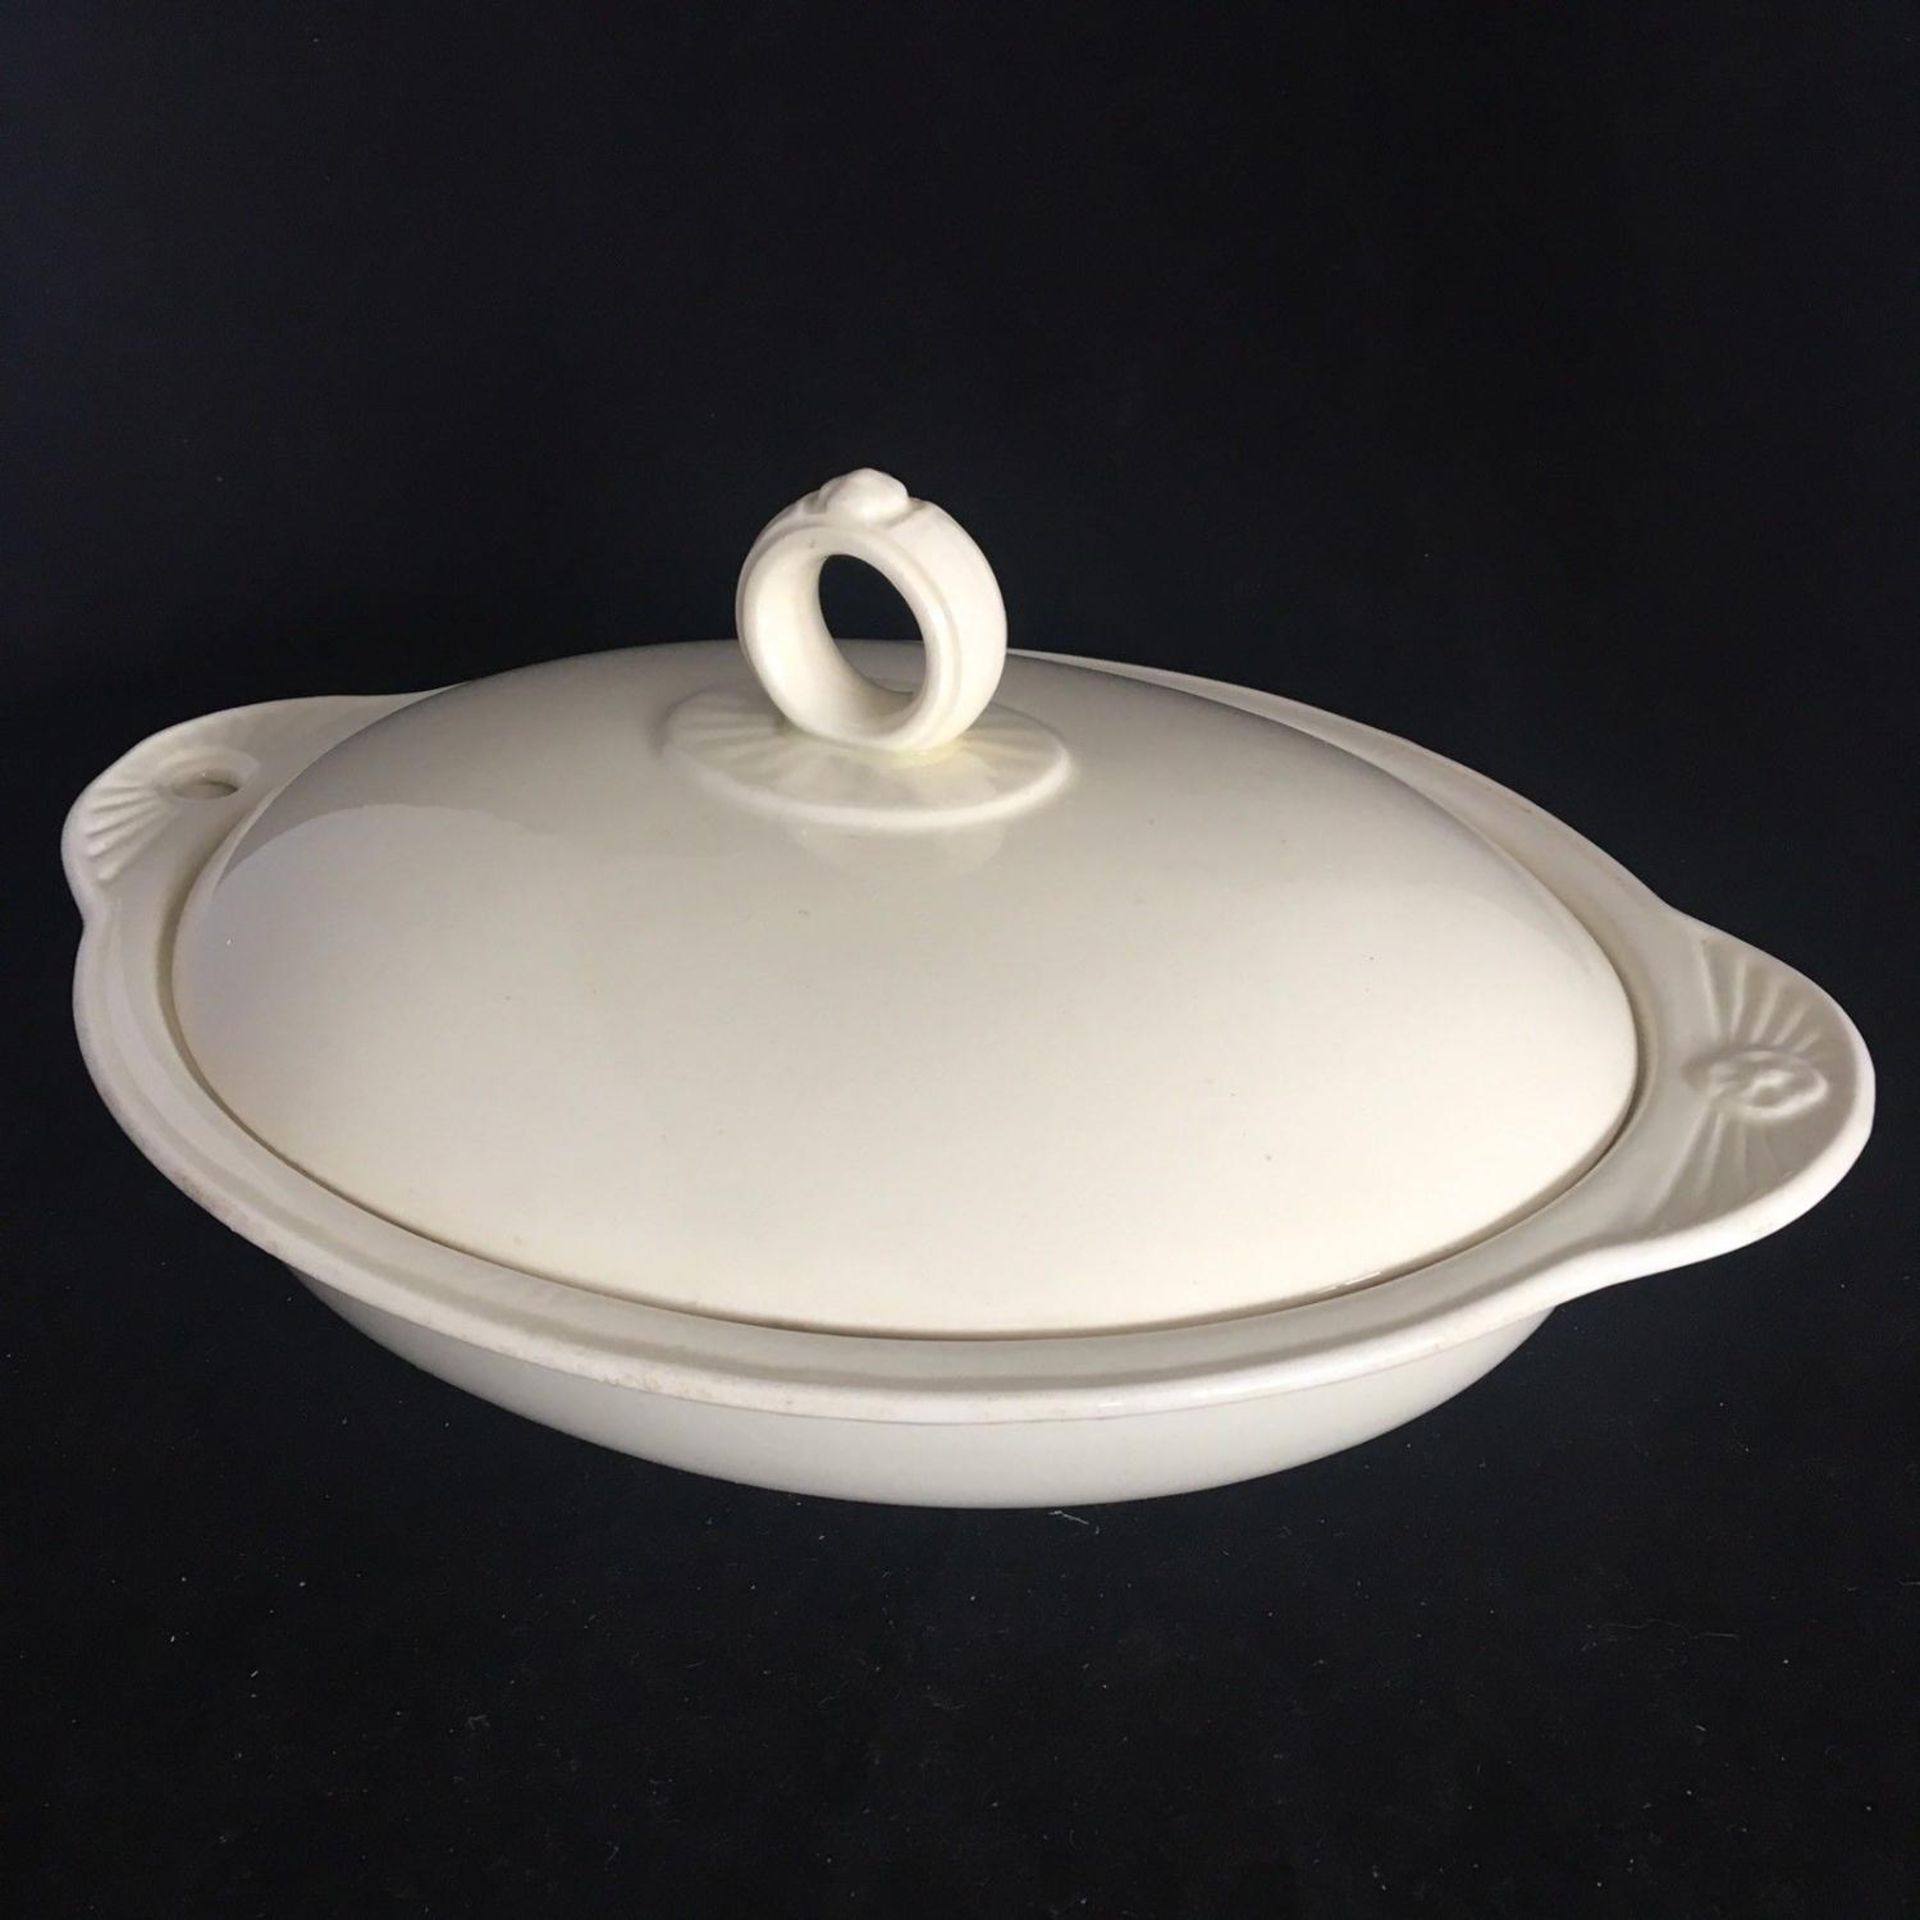 19th Century Wedgwood Cream Warming Dish Plate & Cover Meat Serving Platter